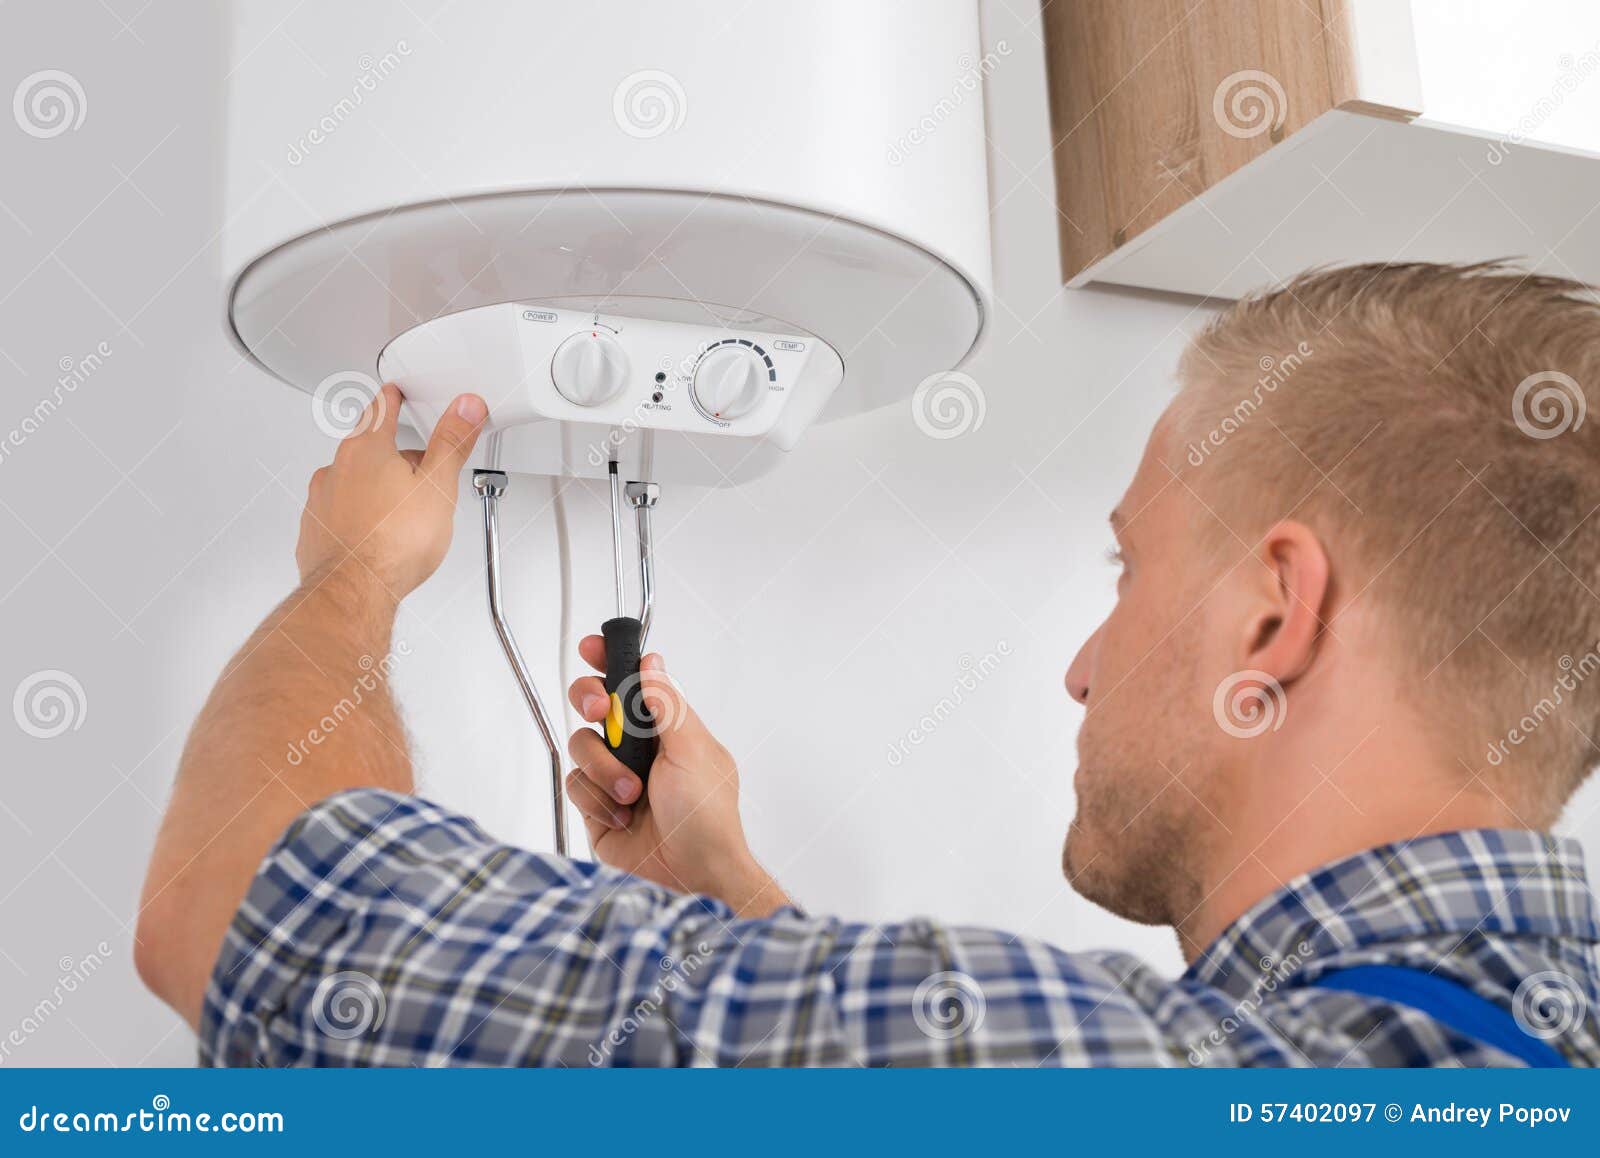 worker fixing electric boiler